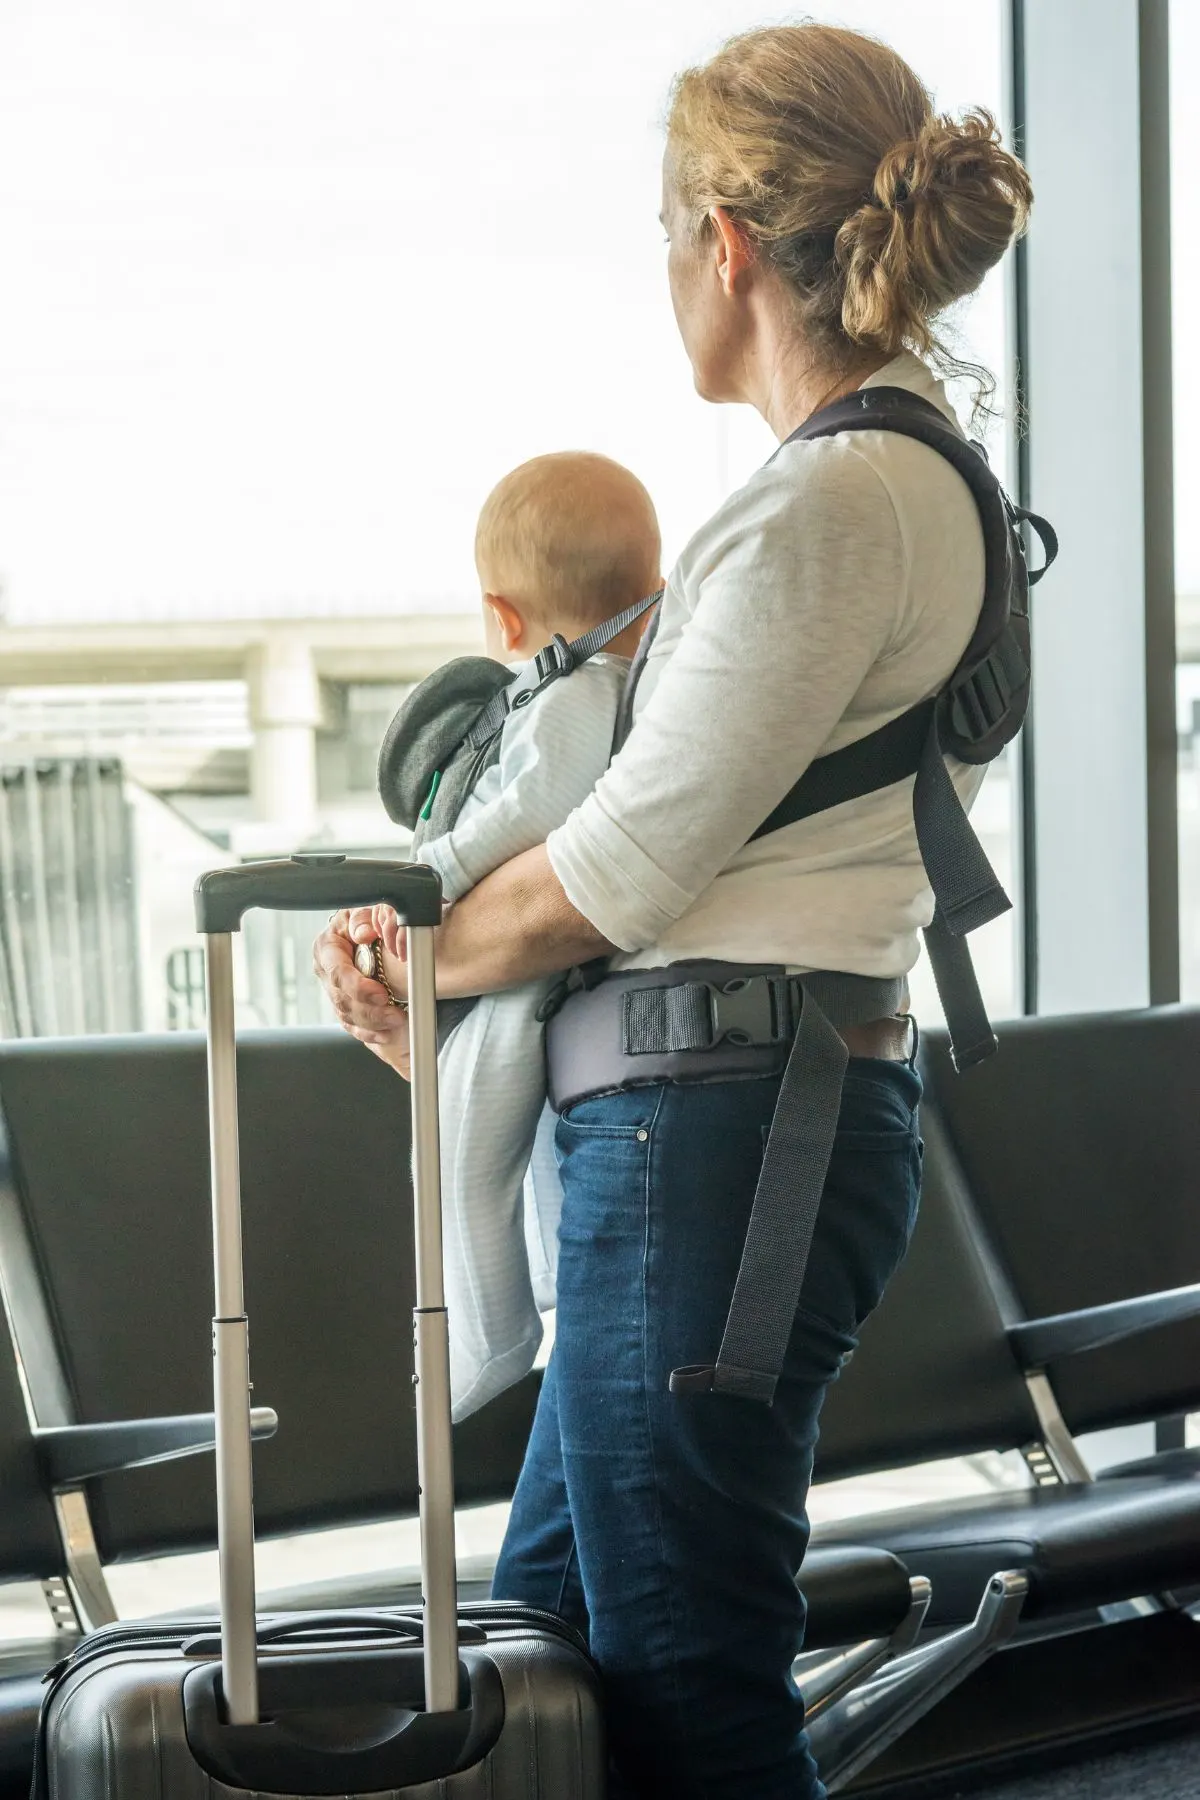 Mom holds her baby in a carrier with her luggage in front of airport window.